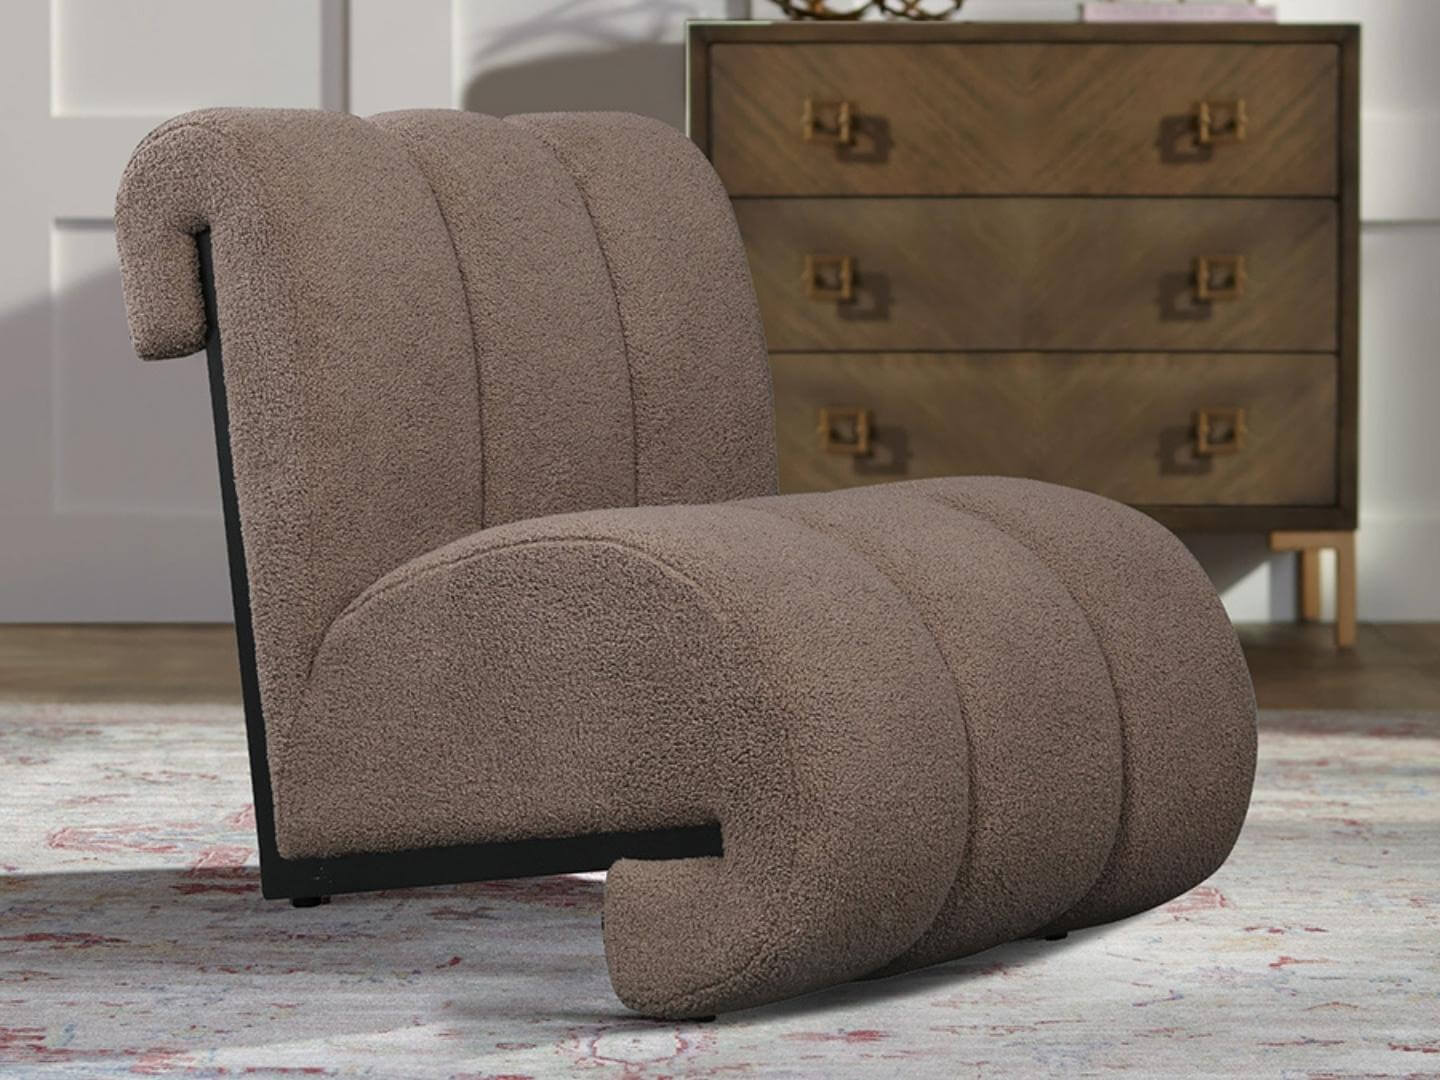  viego armchair brown color - LUX FURNITURE